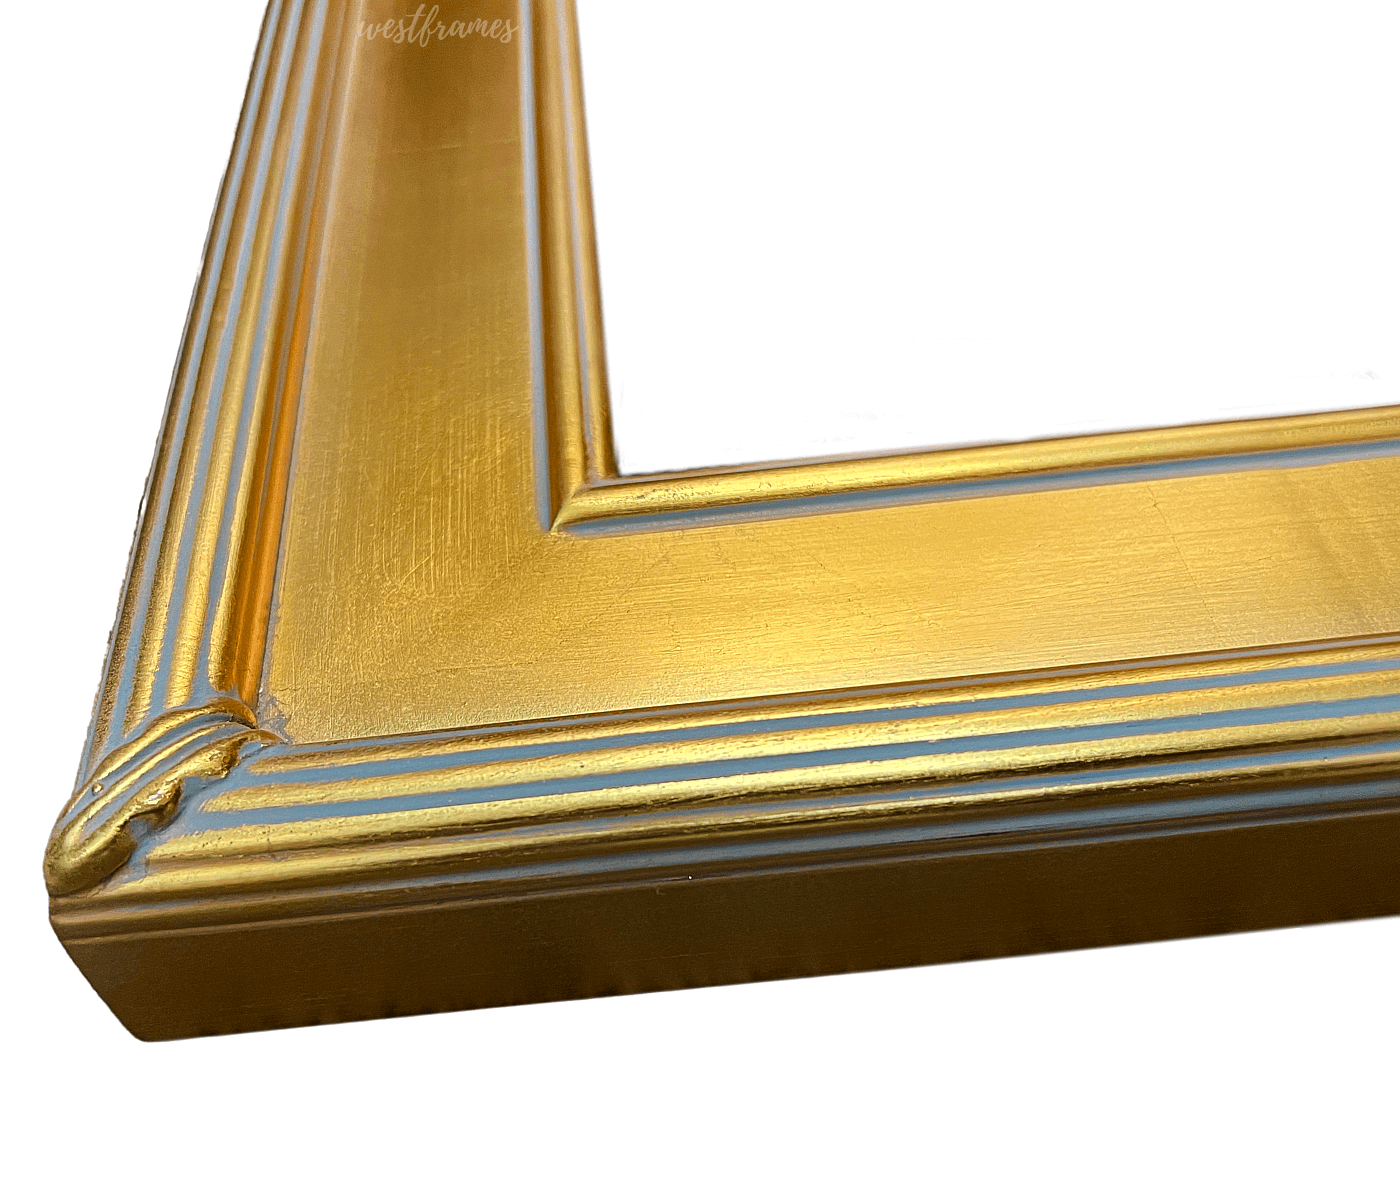 The Gallery Classic Gold Leaf Wood Plein Air Closed Corner Picture Frame 3" Wide - West Frames